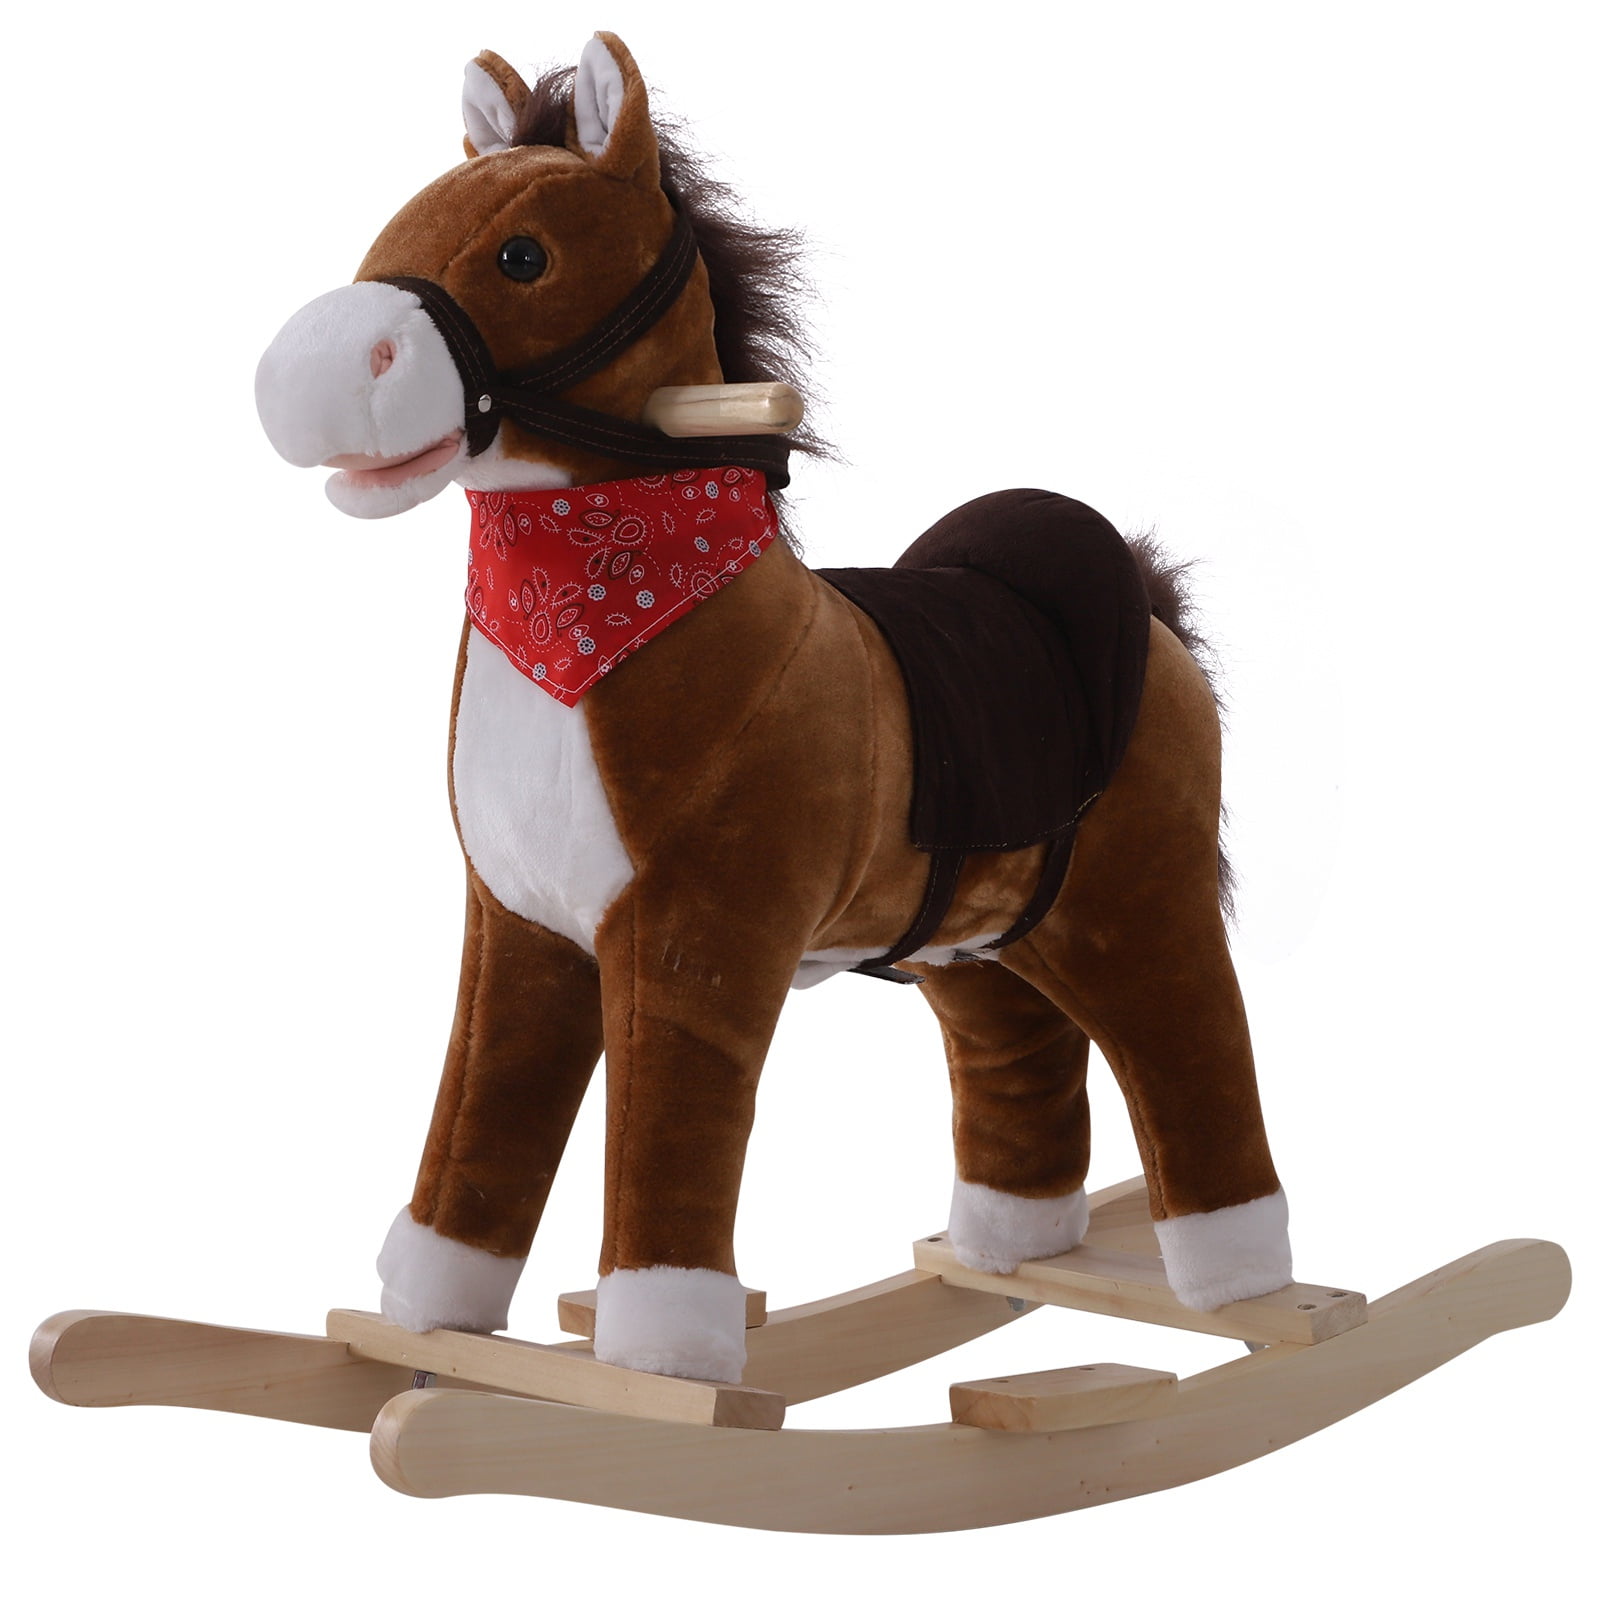 Details about   Kids Toy Rocking Horse Wood Plush Pony Wooden Riding Traditional Gift With Music 